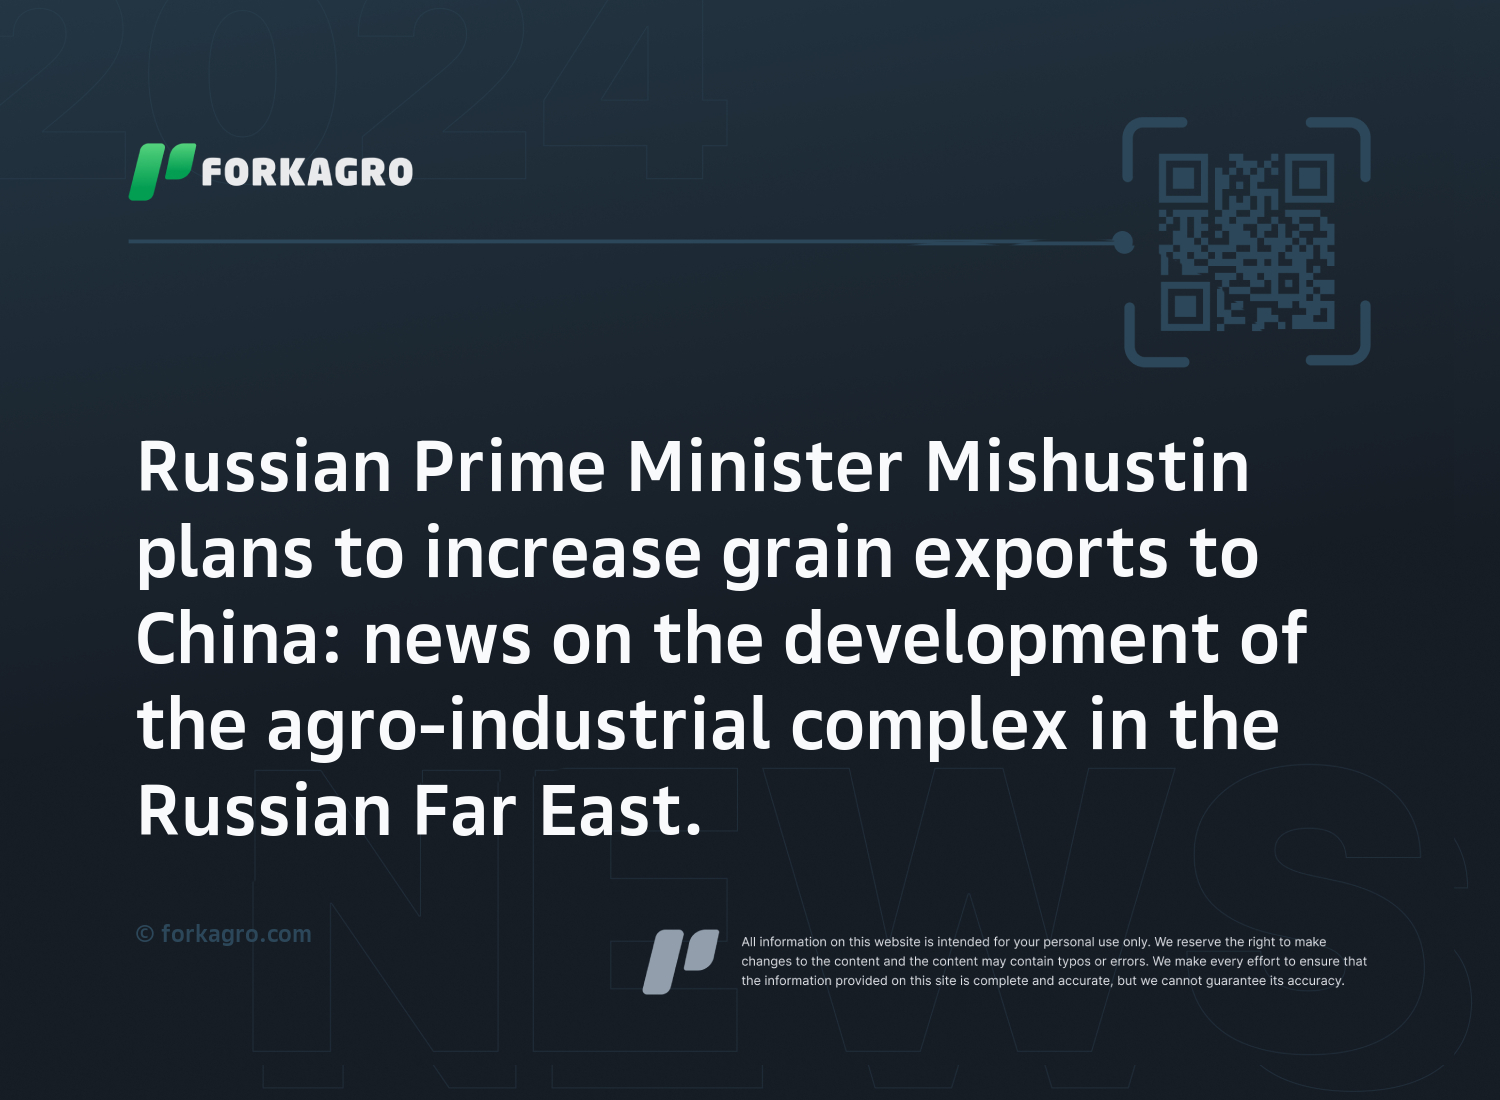 Russian Prime Minister Mishustin plans to increase grain exports to China: news on the development of the agro-industrial complex in the Russian Far East.